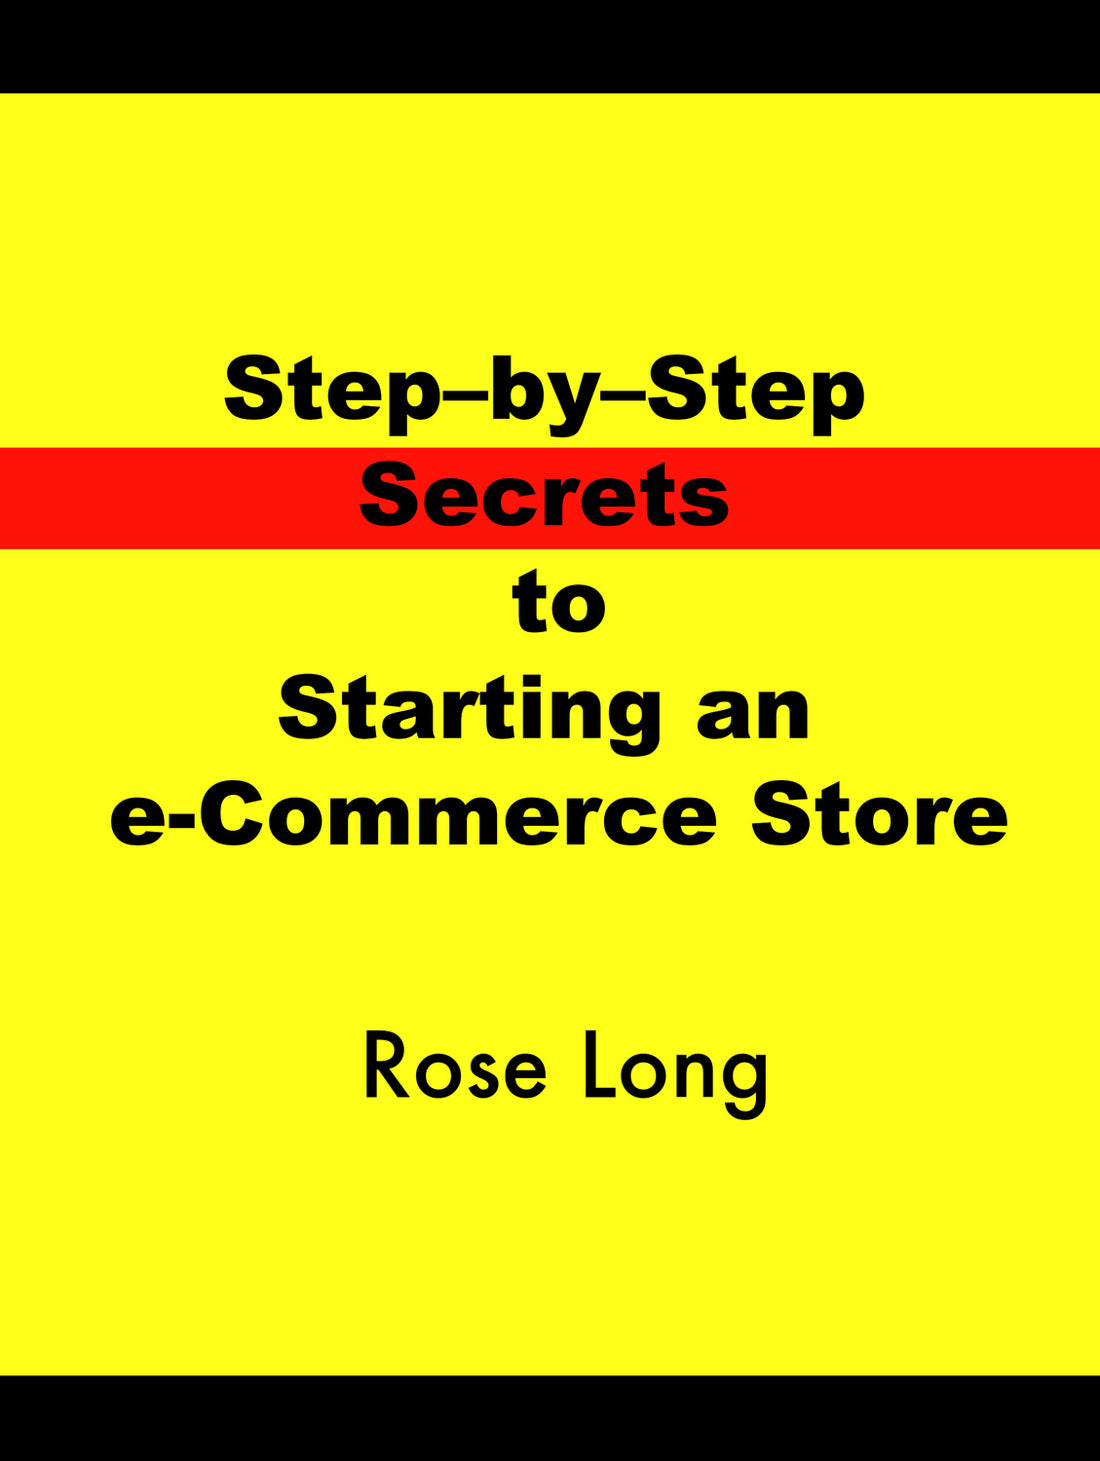 Step-by-Step Secrets to Starting an e-Commerce Store